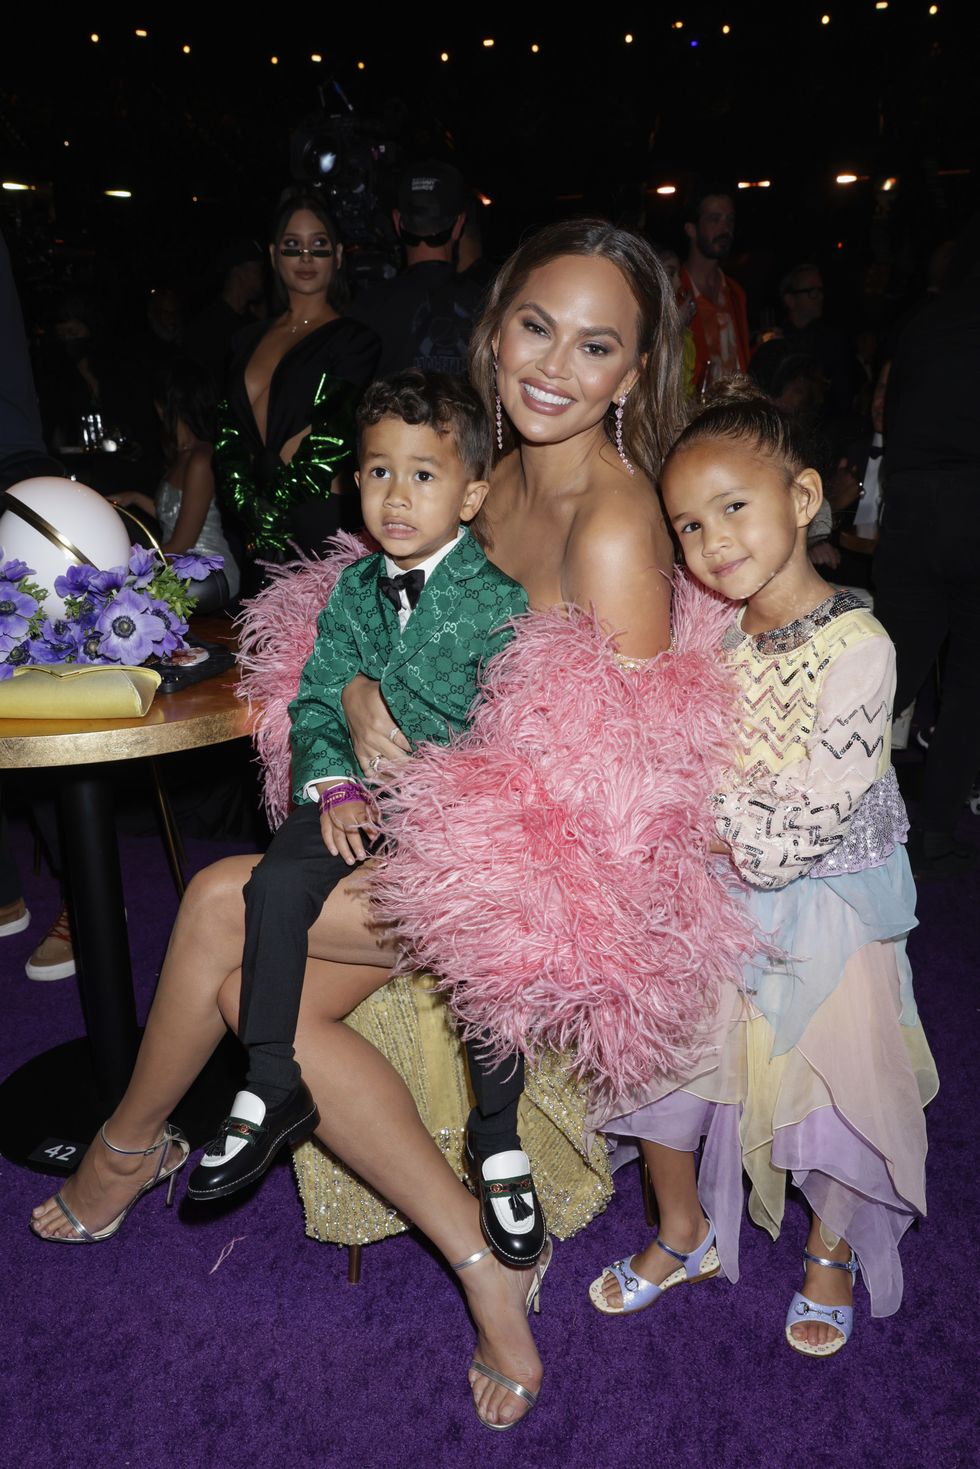 las vegas   april 3 chrissy teigen and family at the 64th annual grammy awards, broadcasting live sunday, april 3 800 1130 pm, live et500 830 pm, live pt on the cbs television network, and available to stream live and on demand on paramount photo by francis speckercbs via getty images